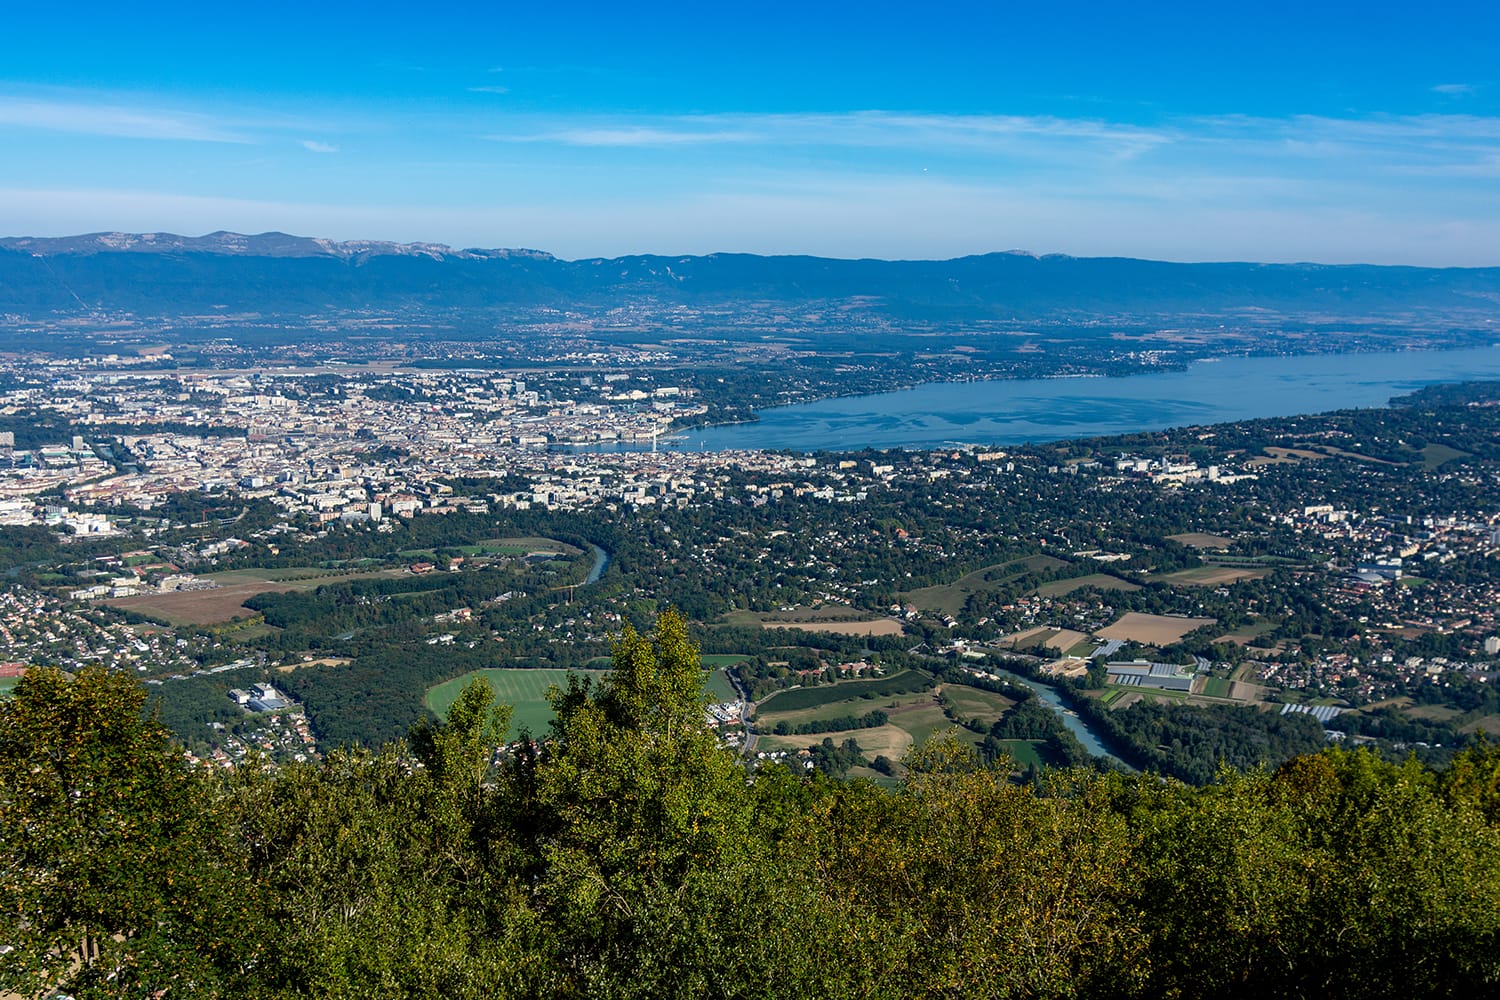 Aerial view of Geneva, Switzerland, lac lemon / geneva lake and the surounding landscape as seen from Mont-Saleve, France